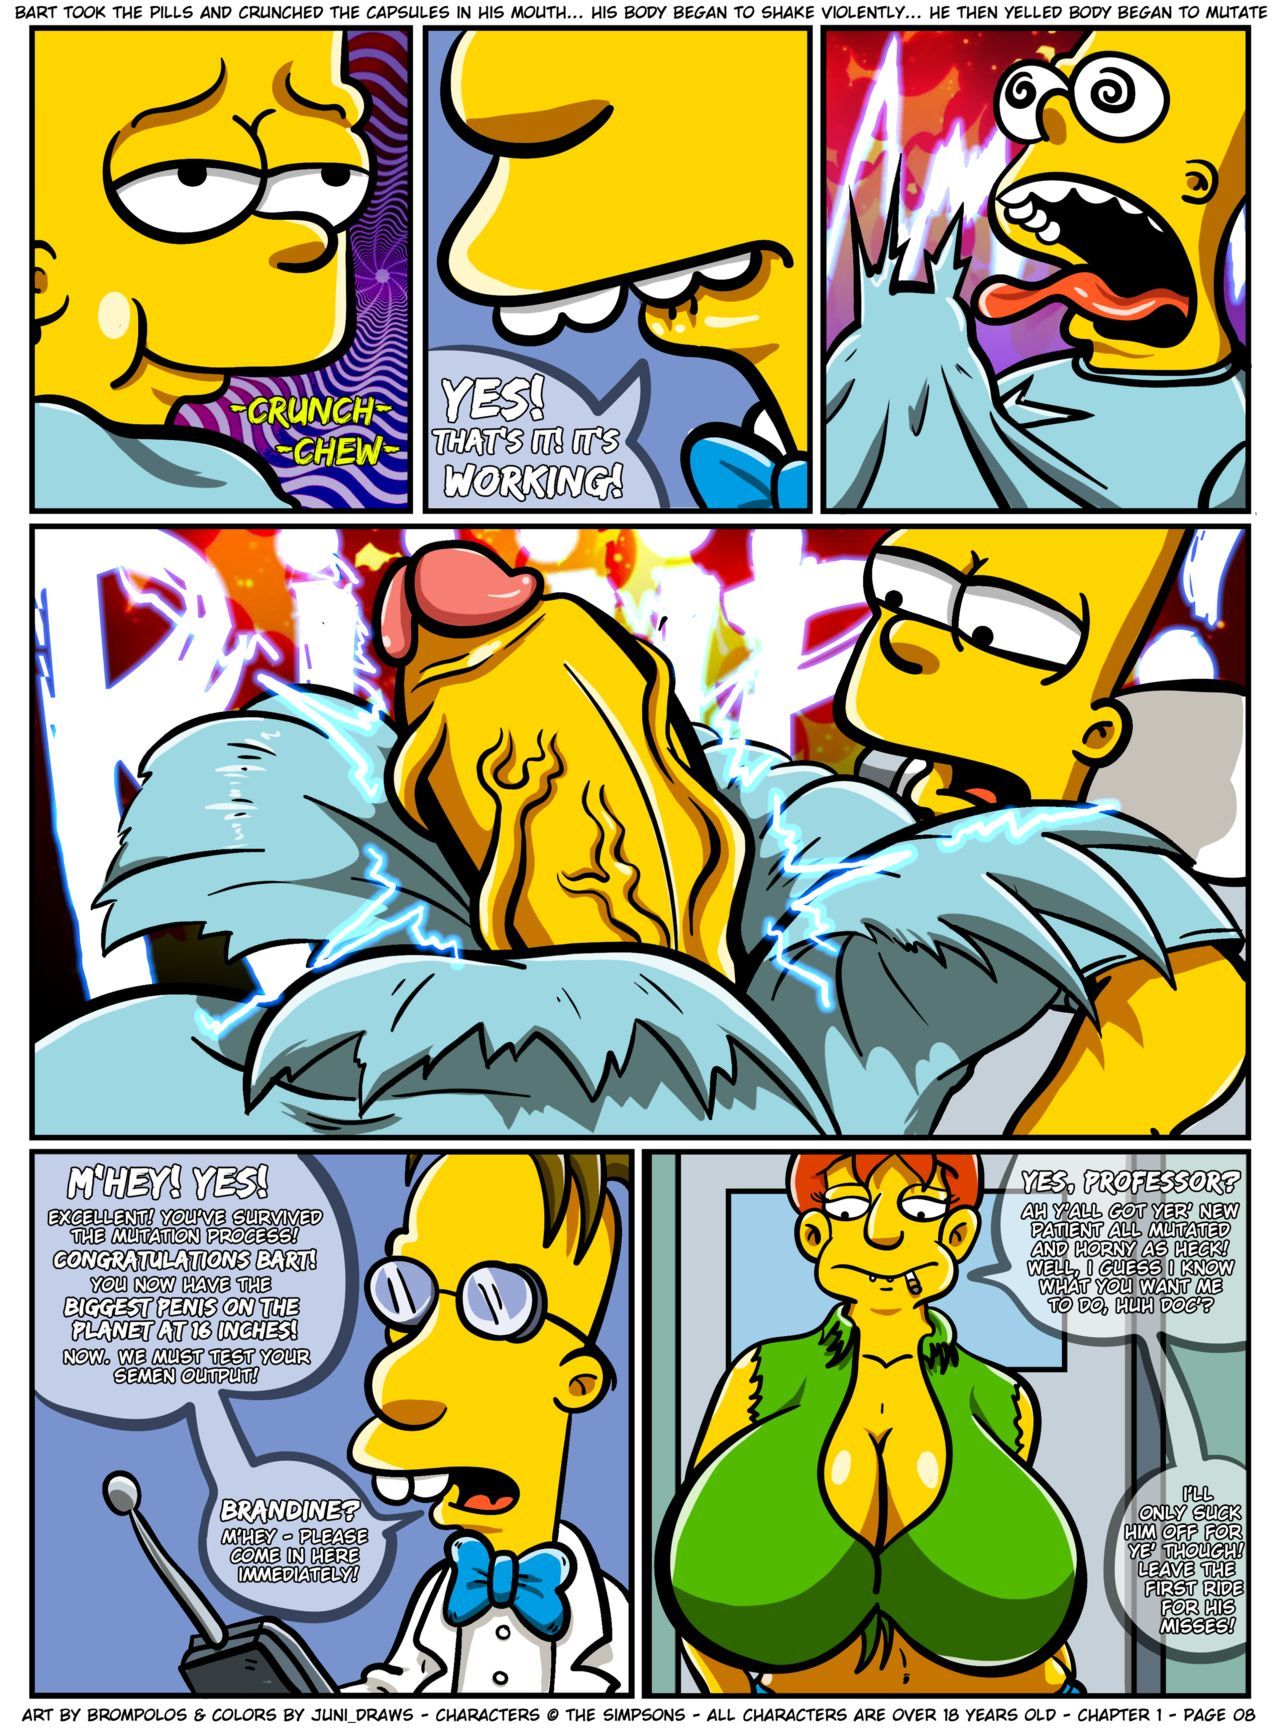 [Brompolos/Juni_Draws] The Sexensteins (Simpsons) [Ongoing] 9